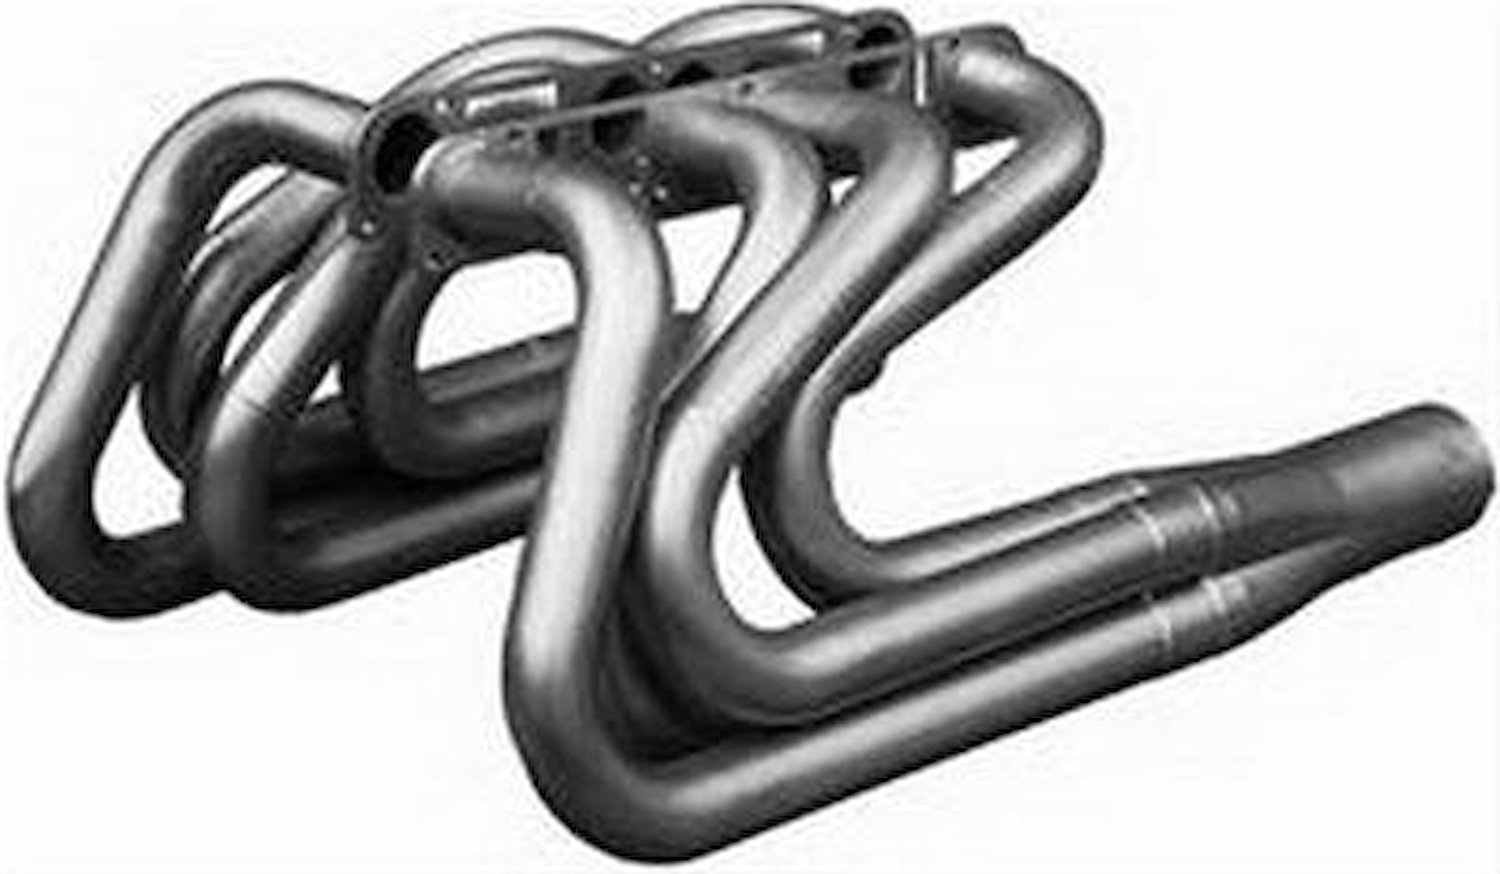 Truck Pull Headers Chevy 302-350 GM 18°